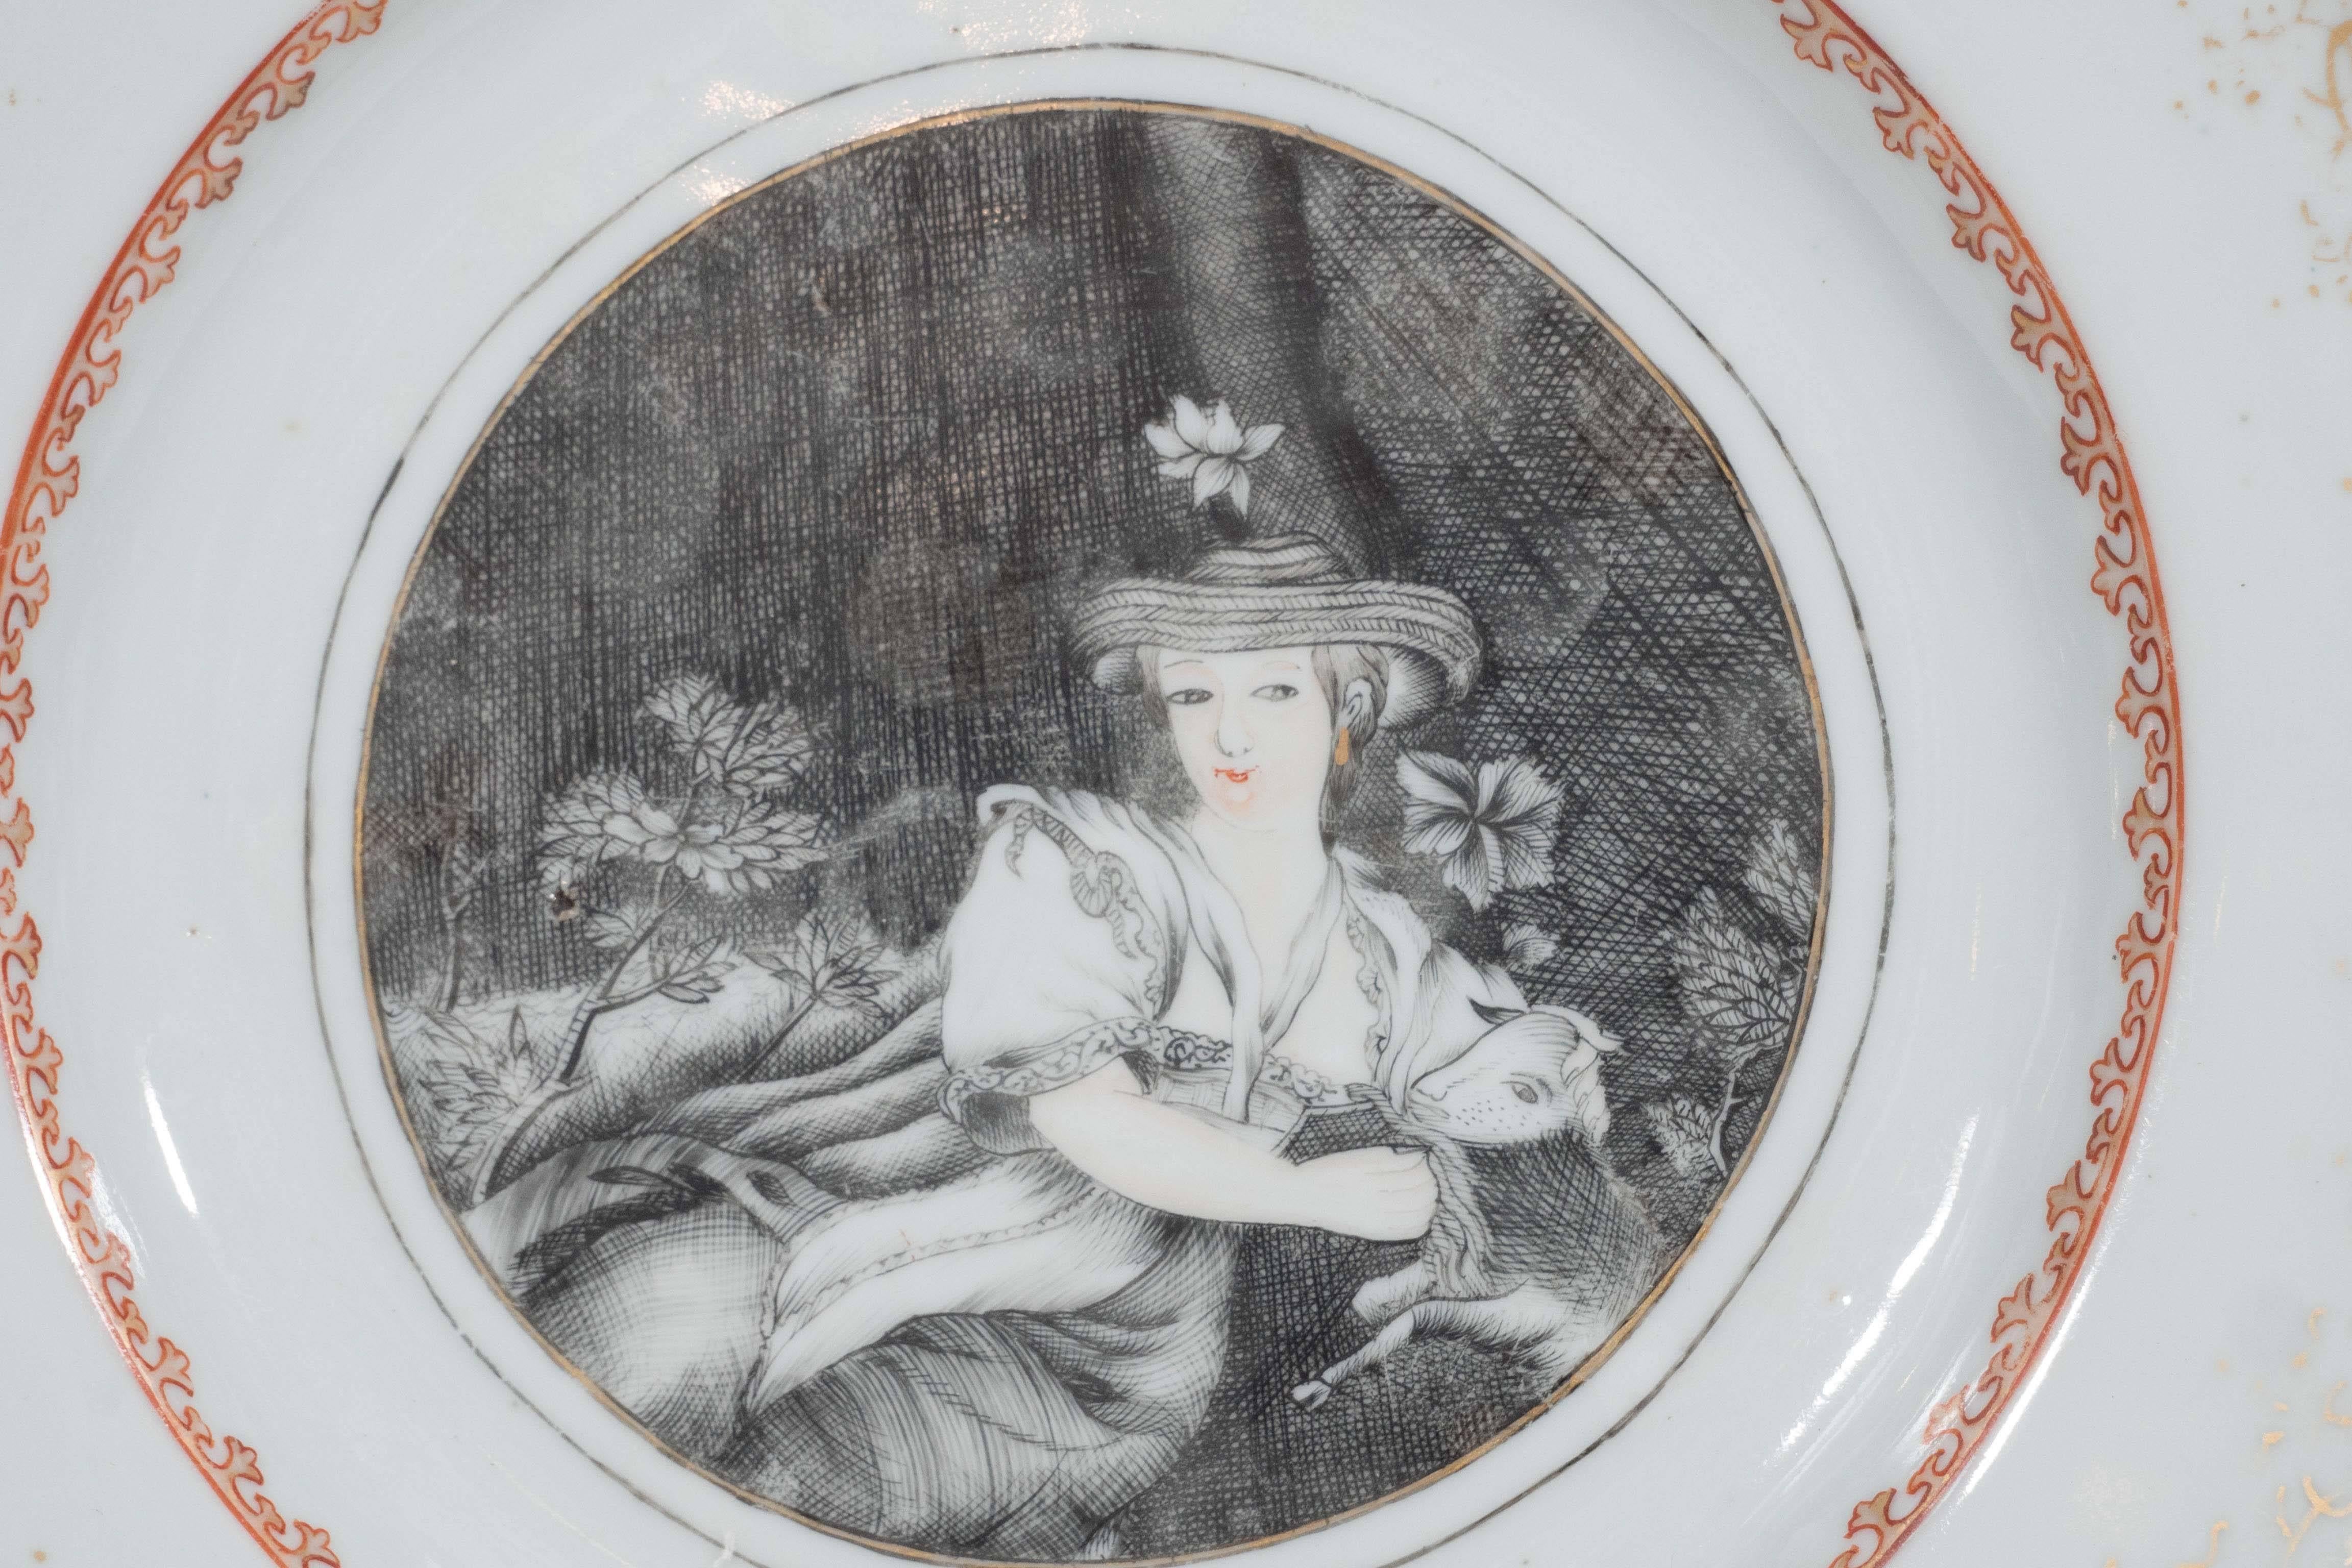 We are pleased to offer this Chinese export dish with a European scene showing a shepherdess. We see her wearing a straw hat with a flower, and resting seated beside a tree trunk, and holding a baby sheep. She is painted in grisaille, and gilt, her